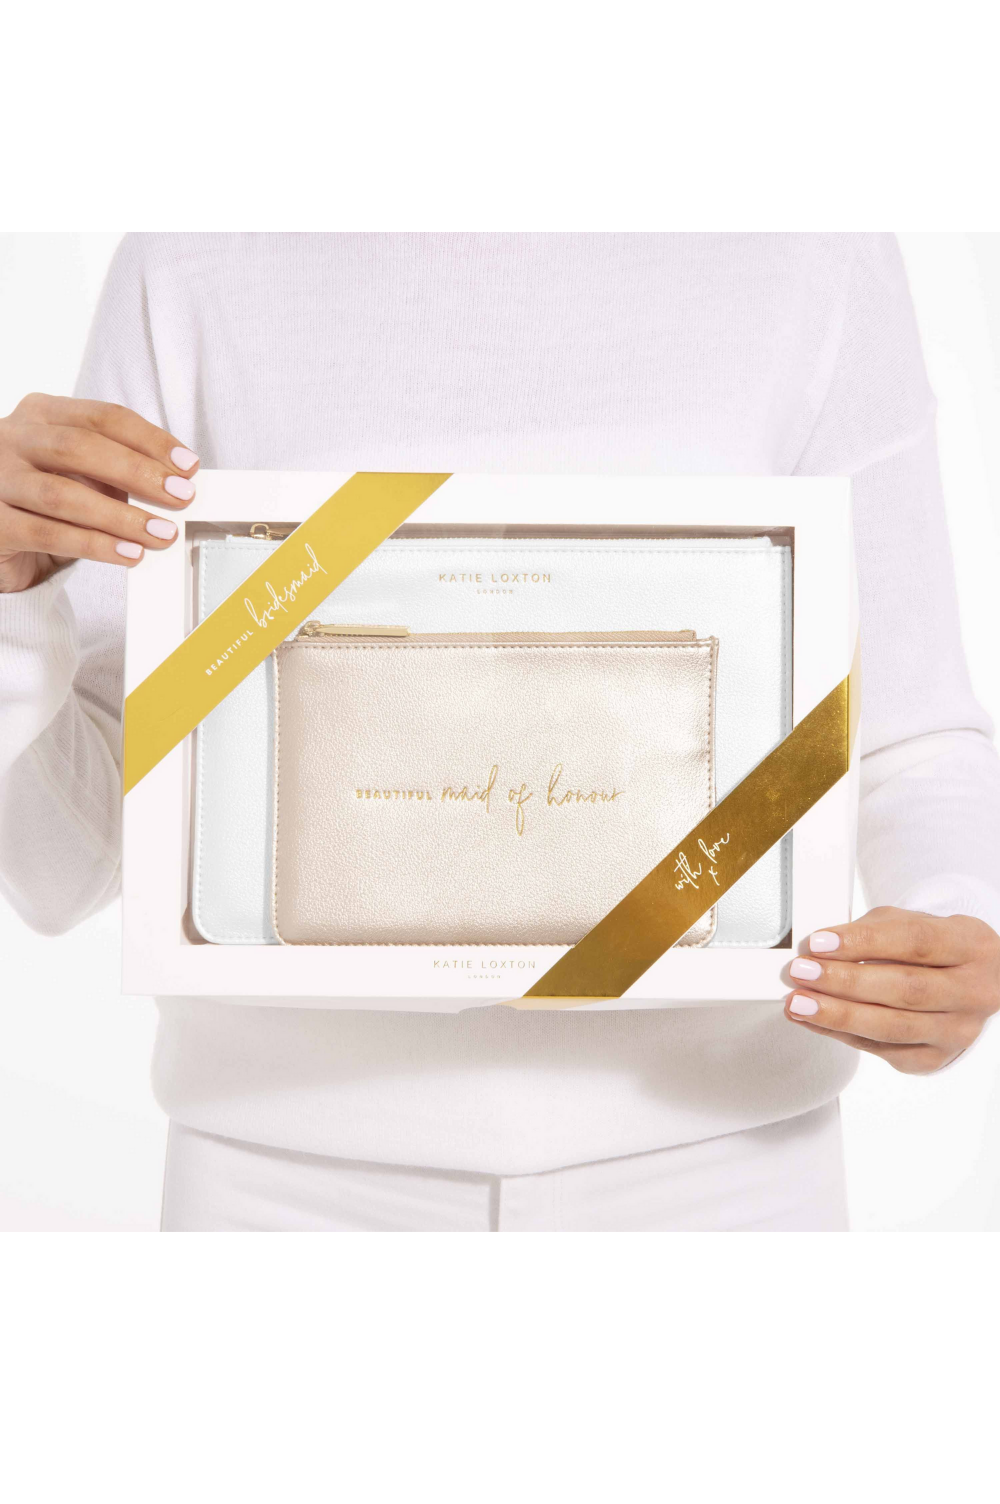 Katie Loxton 'Beautiful Maid of Honour' Perfect Pouch Gift Box